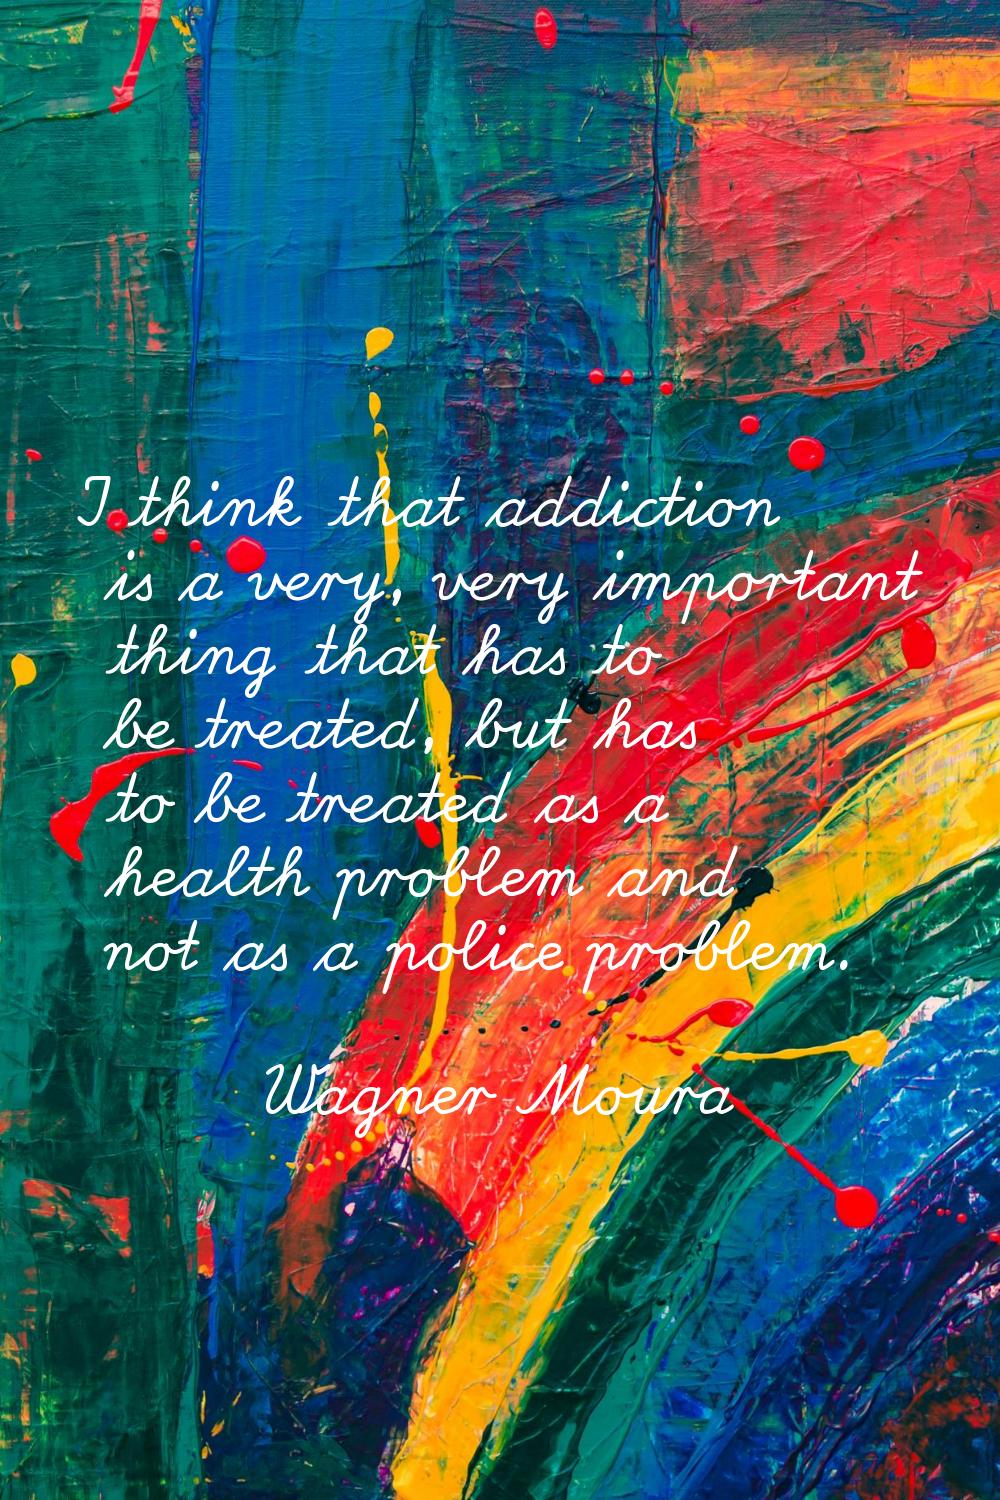 I think that addiction is a very, very important thing that has to be treated, but has to be treate